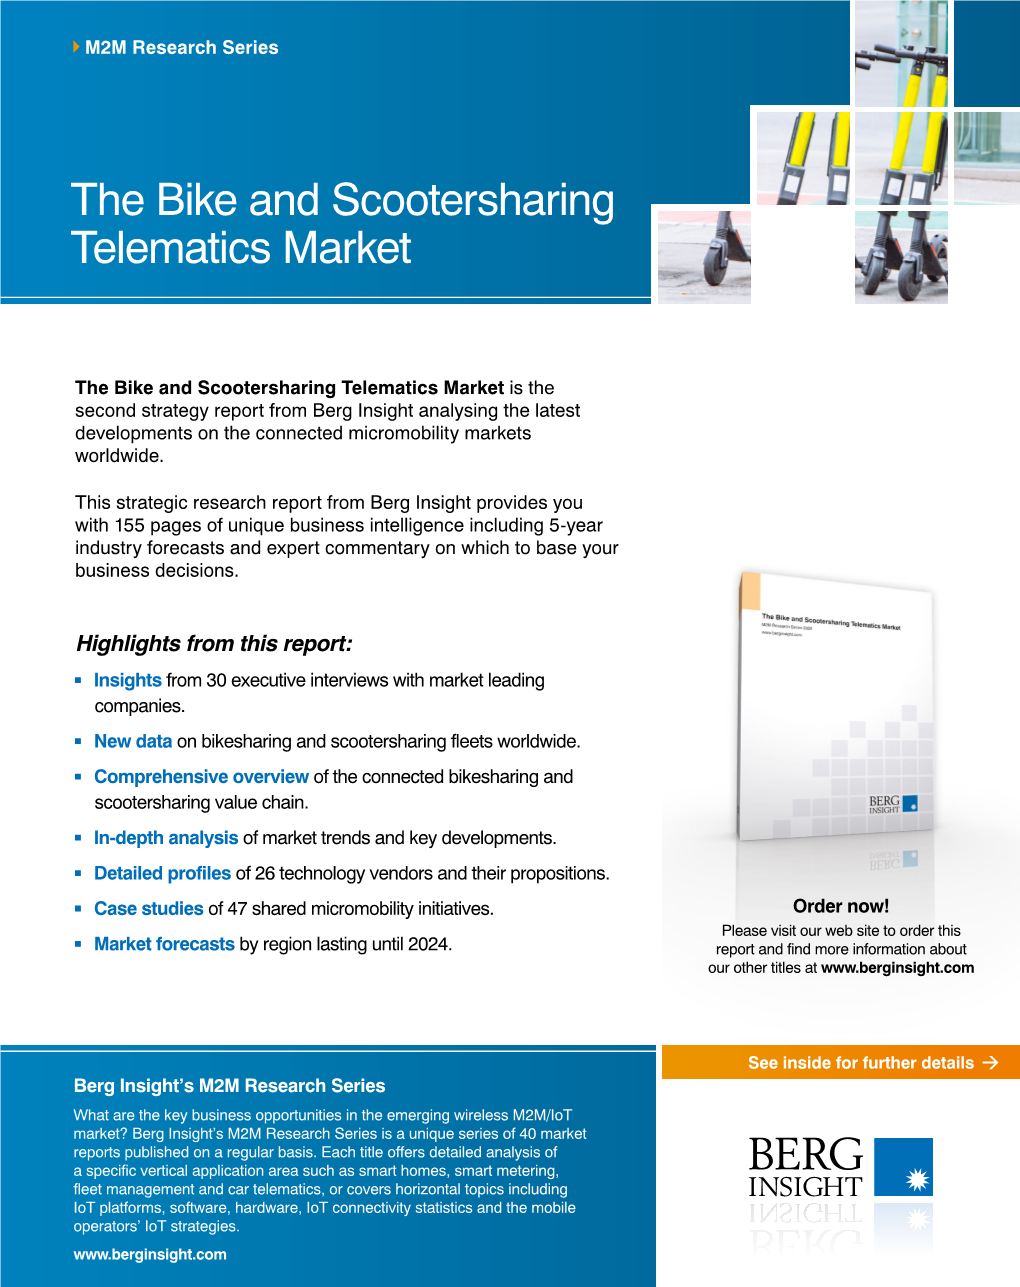 The Bike and Scootersharing Telematics Market